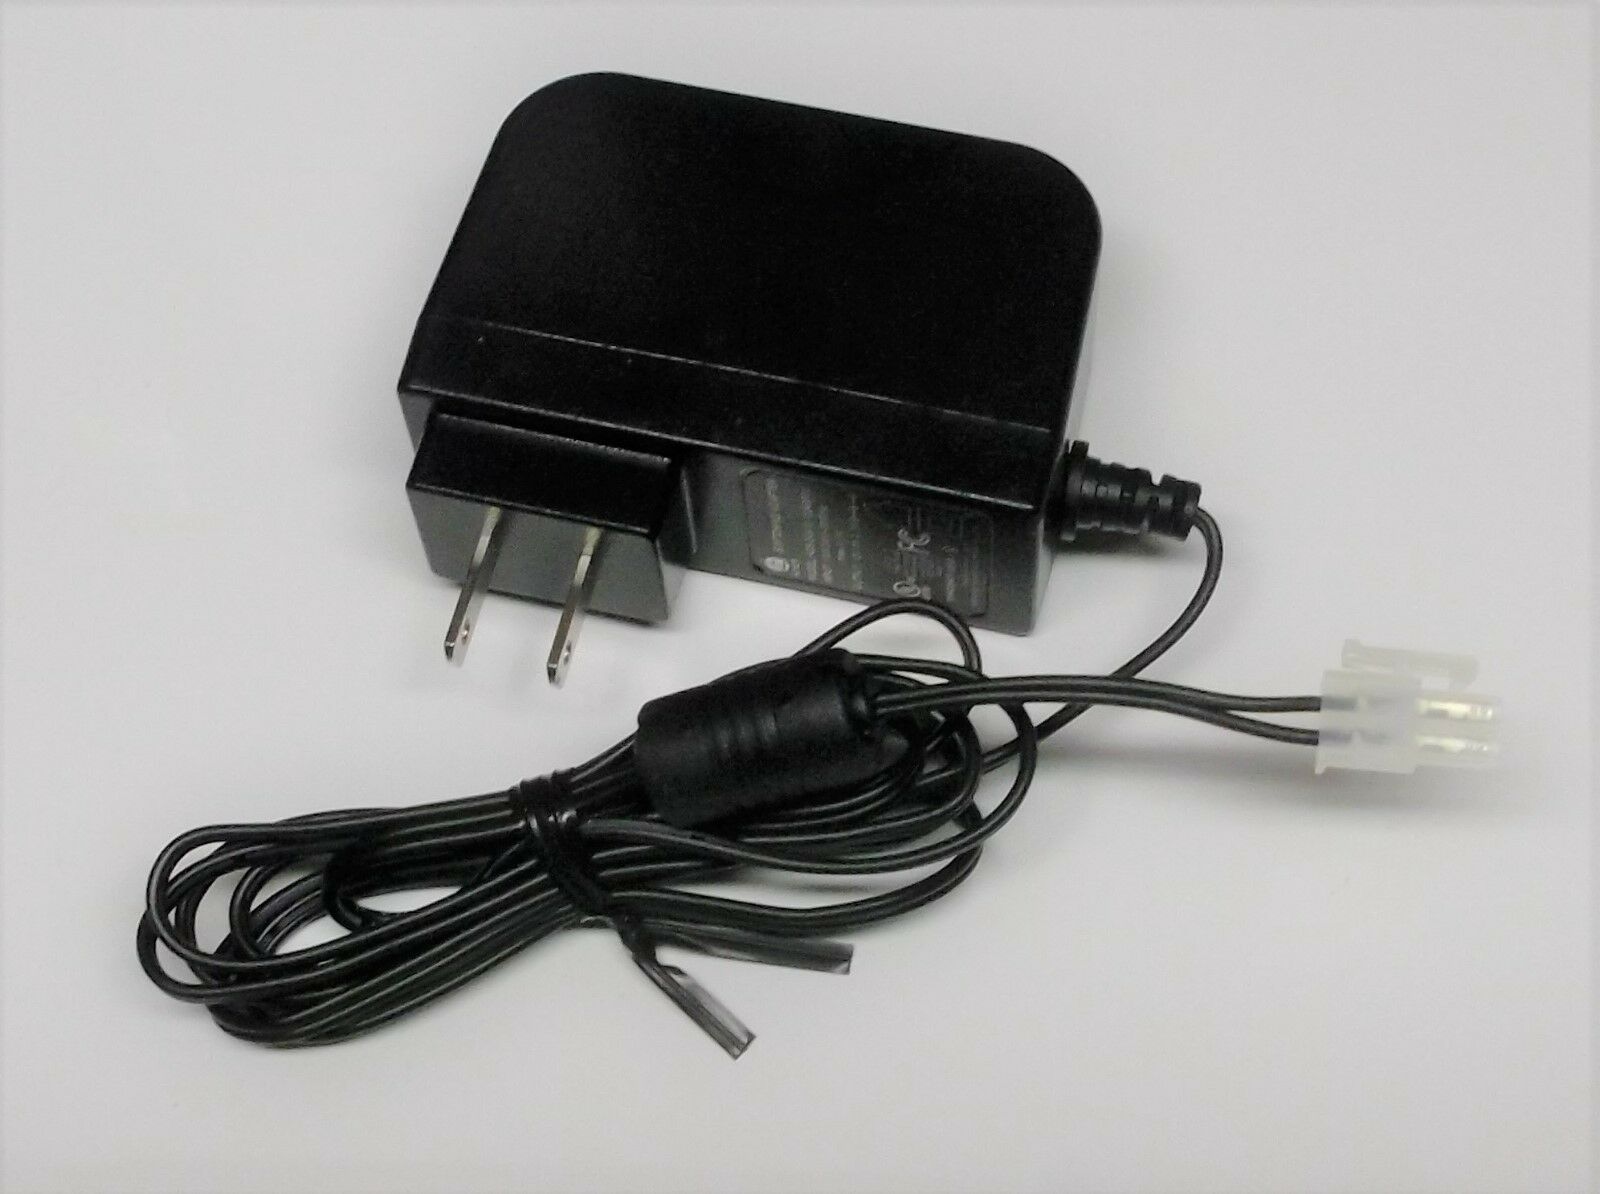 Ac Adapter Power Supply For Sonicwall Tz 210 Tz 190 Tz 180 Tz300 Security Router